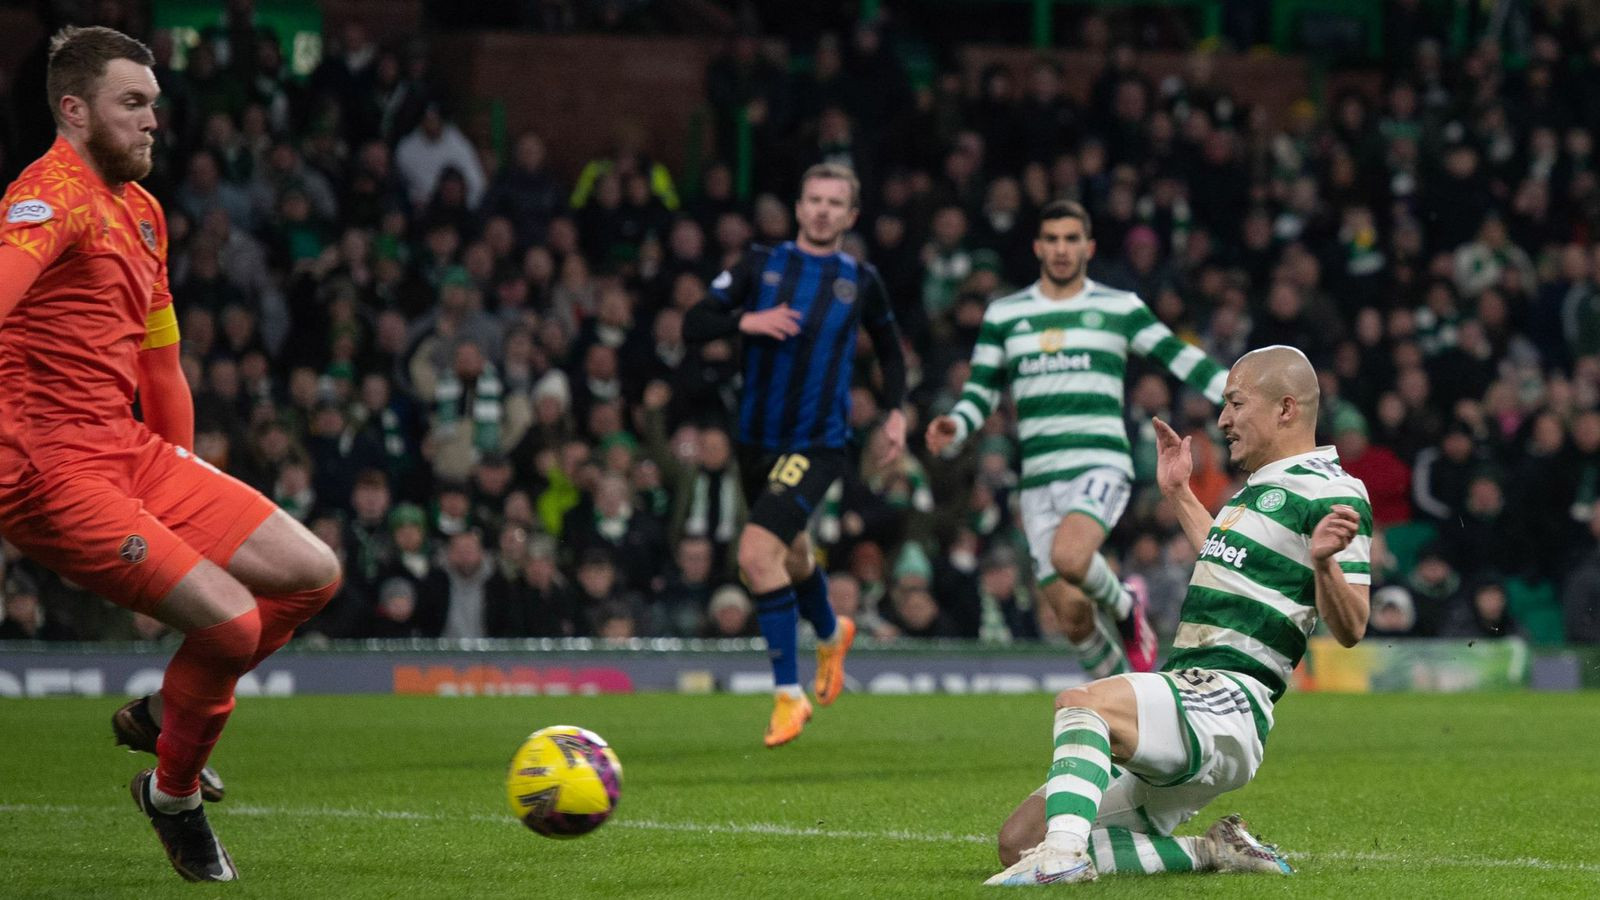 Celtic lead over Rangers stays at nine points